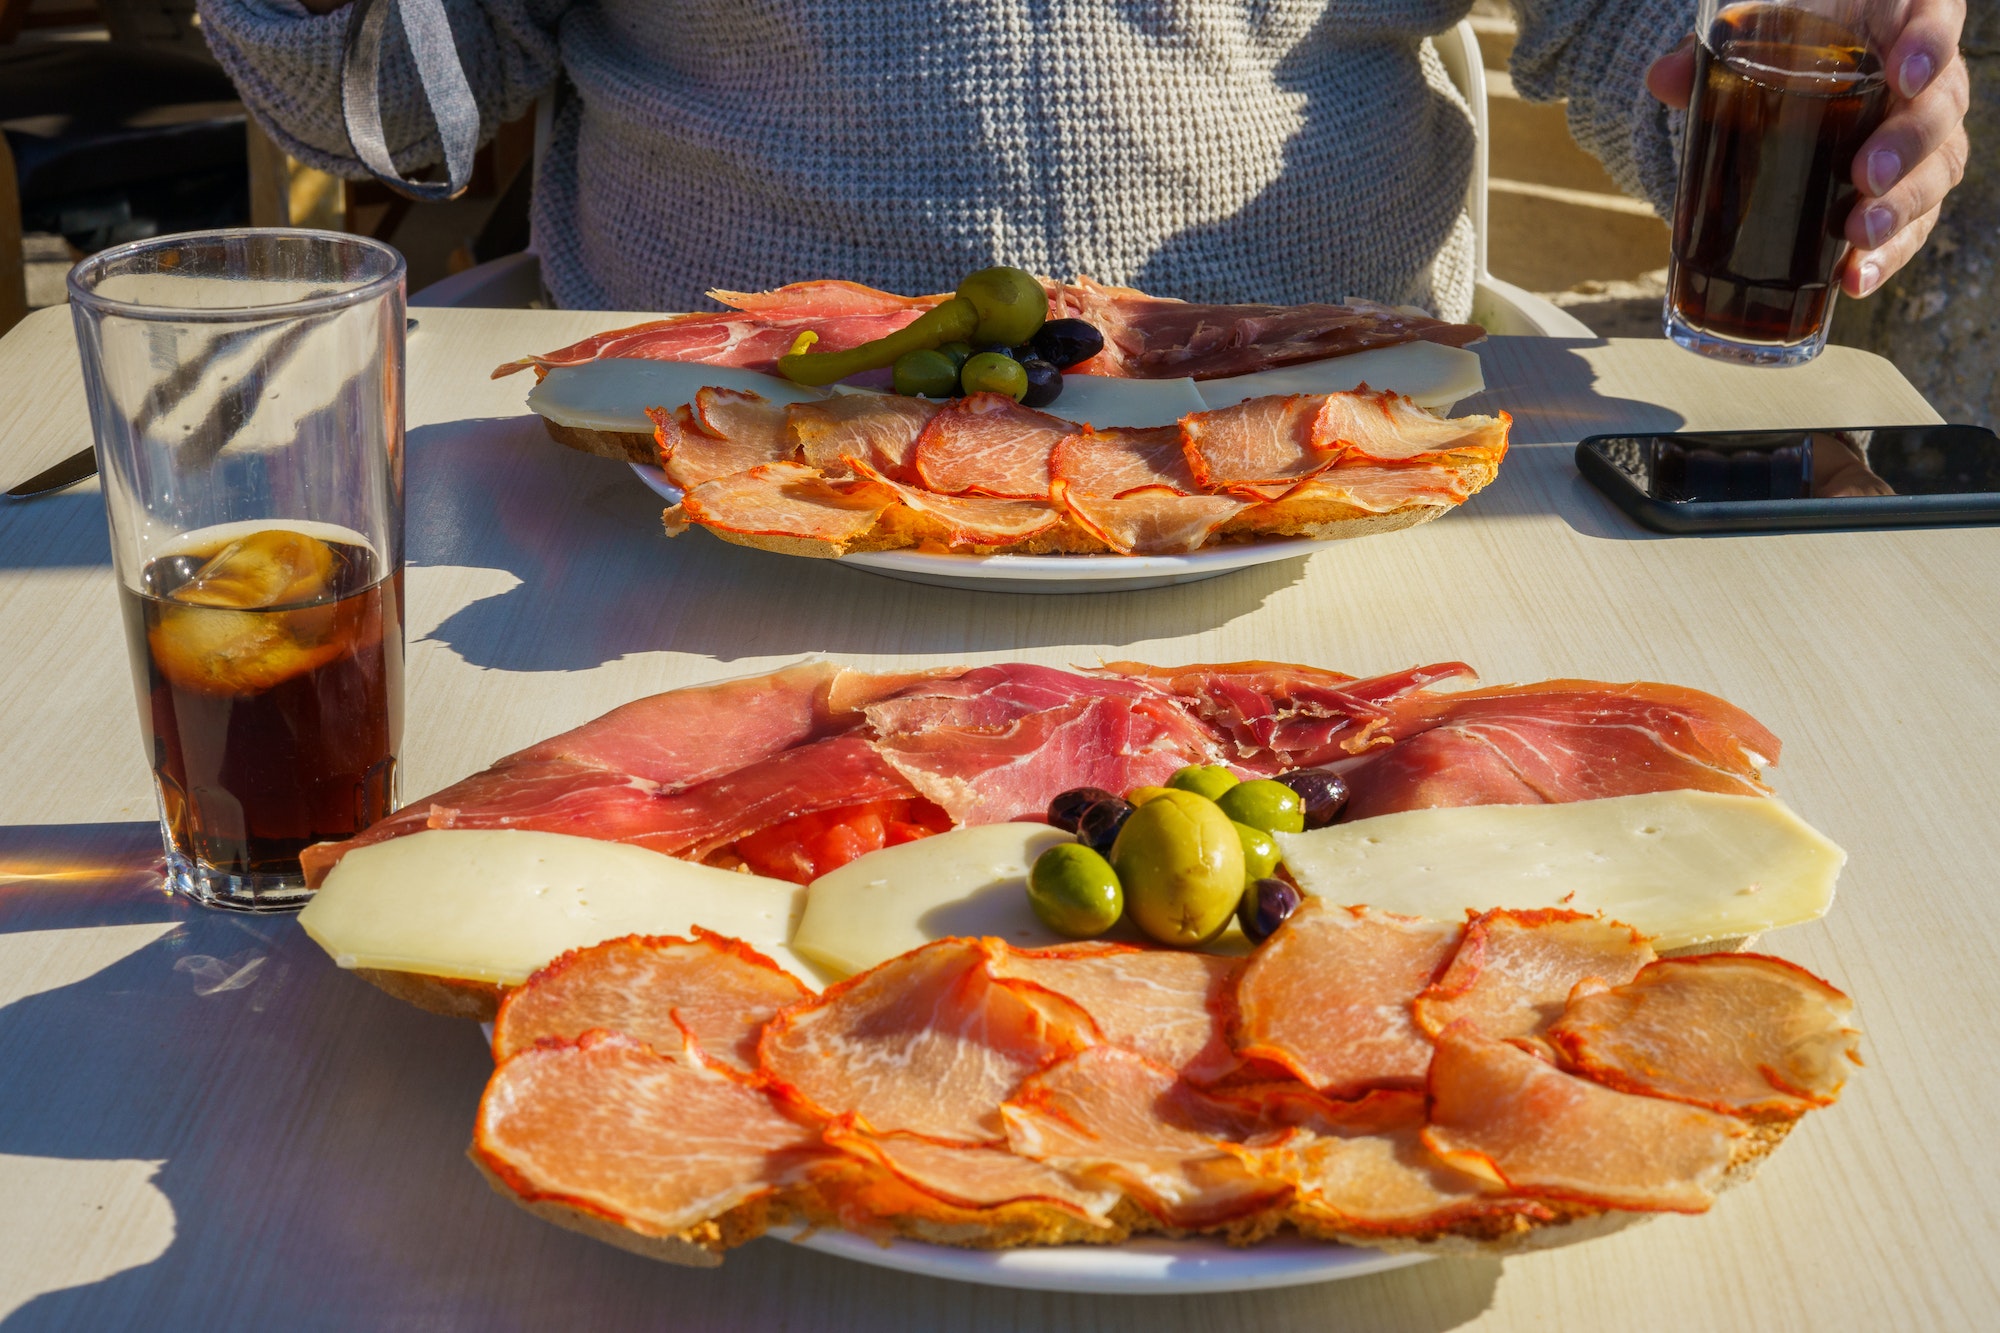 Pa amb oli, typical gastronomy from Mallorca